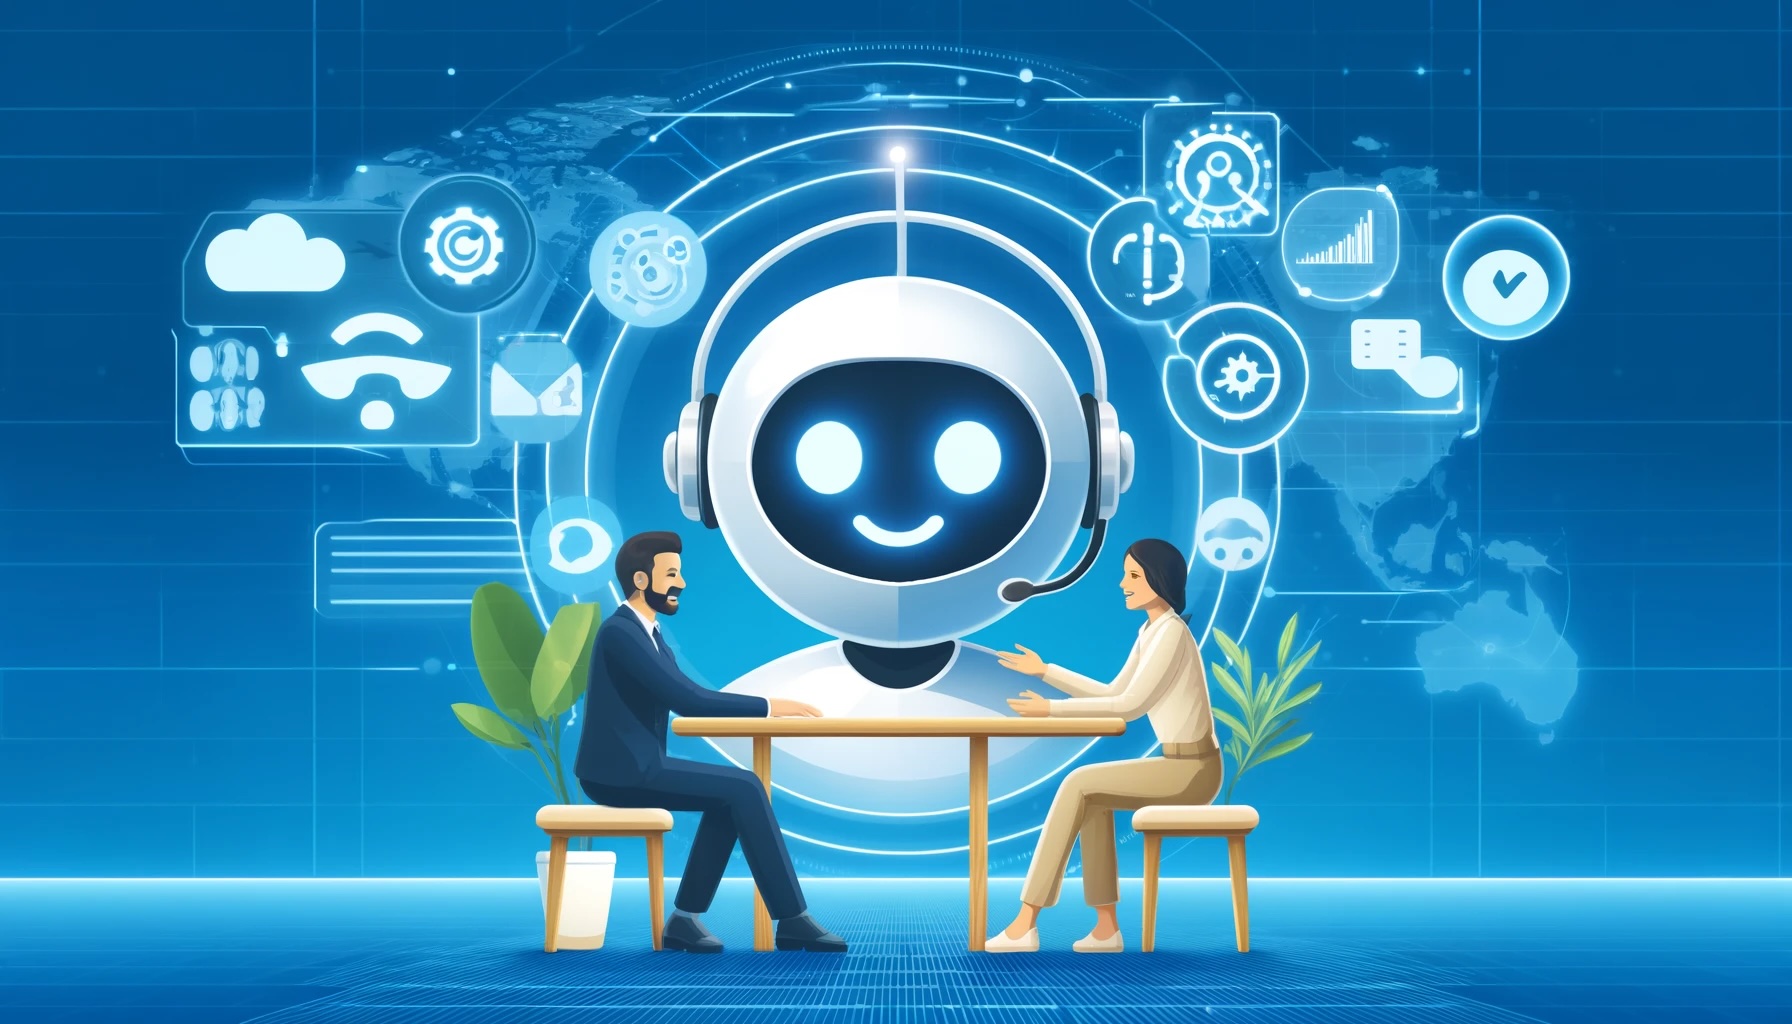 A graphic image of a male and female ecommerce professional sitting across from each other at a table with an image of an AI robot in the background